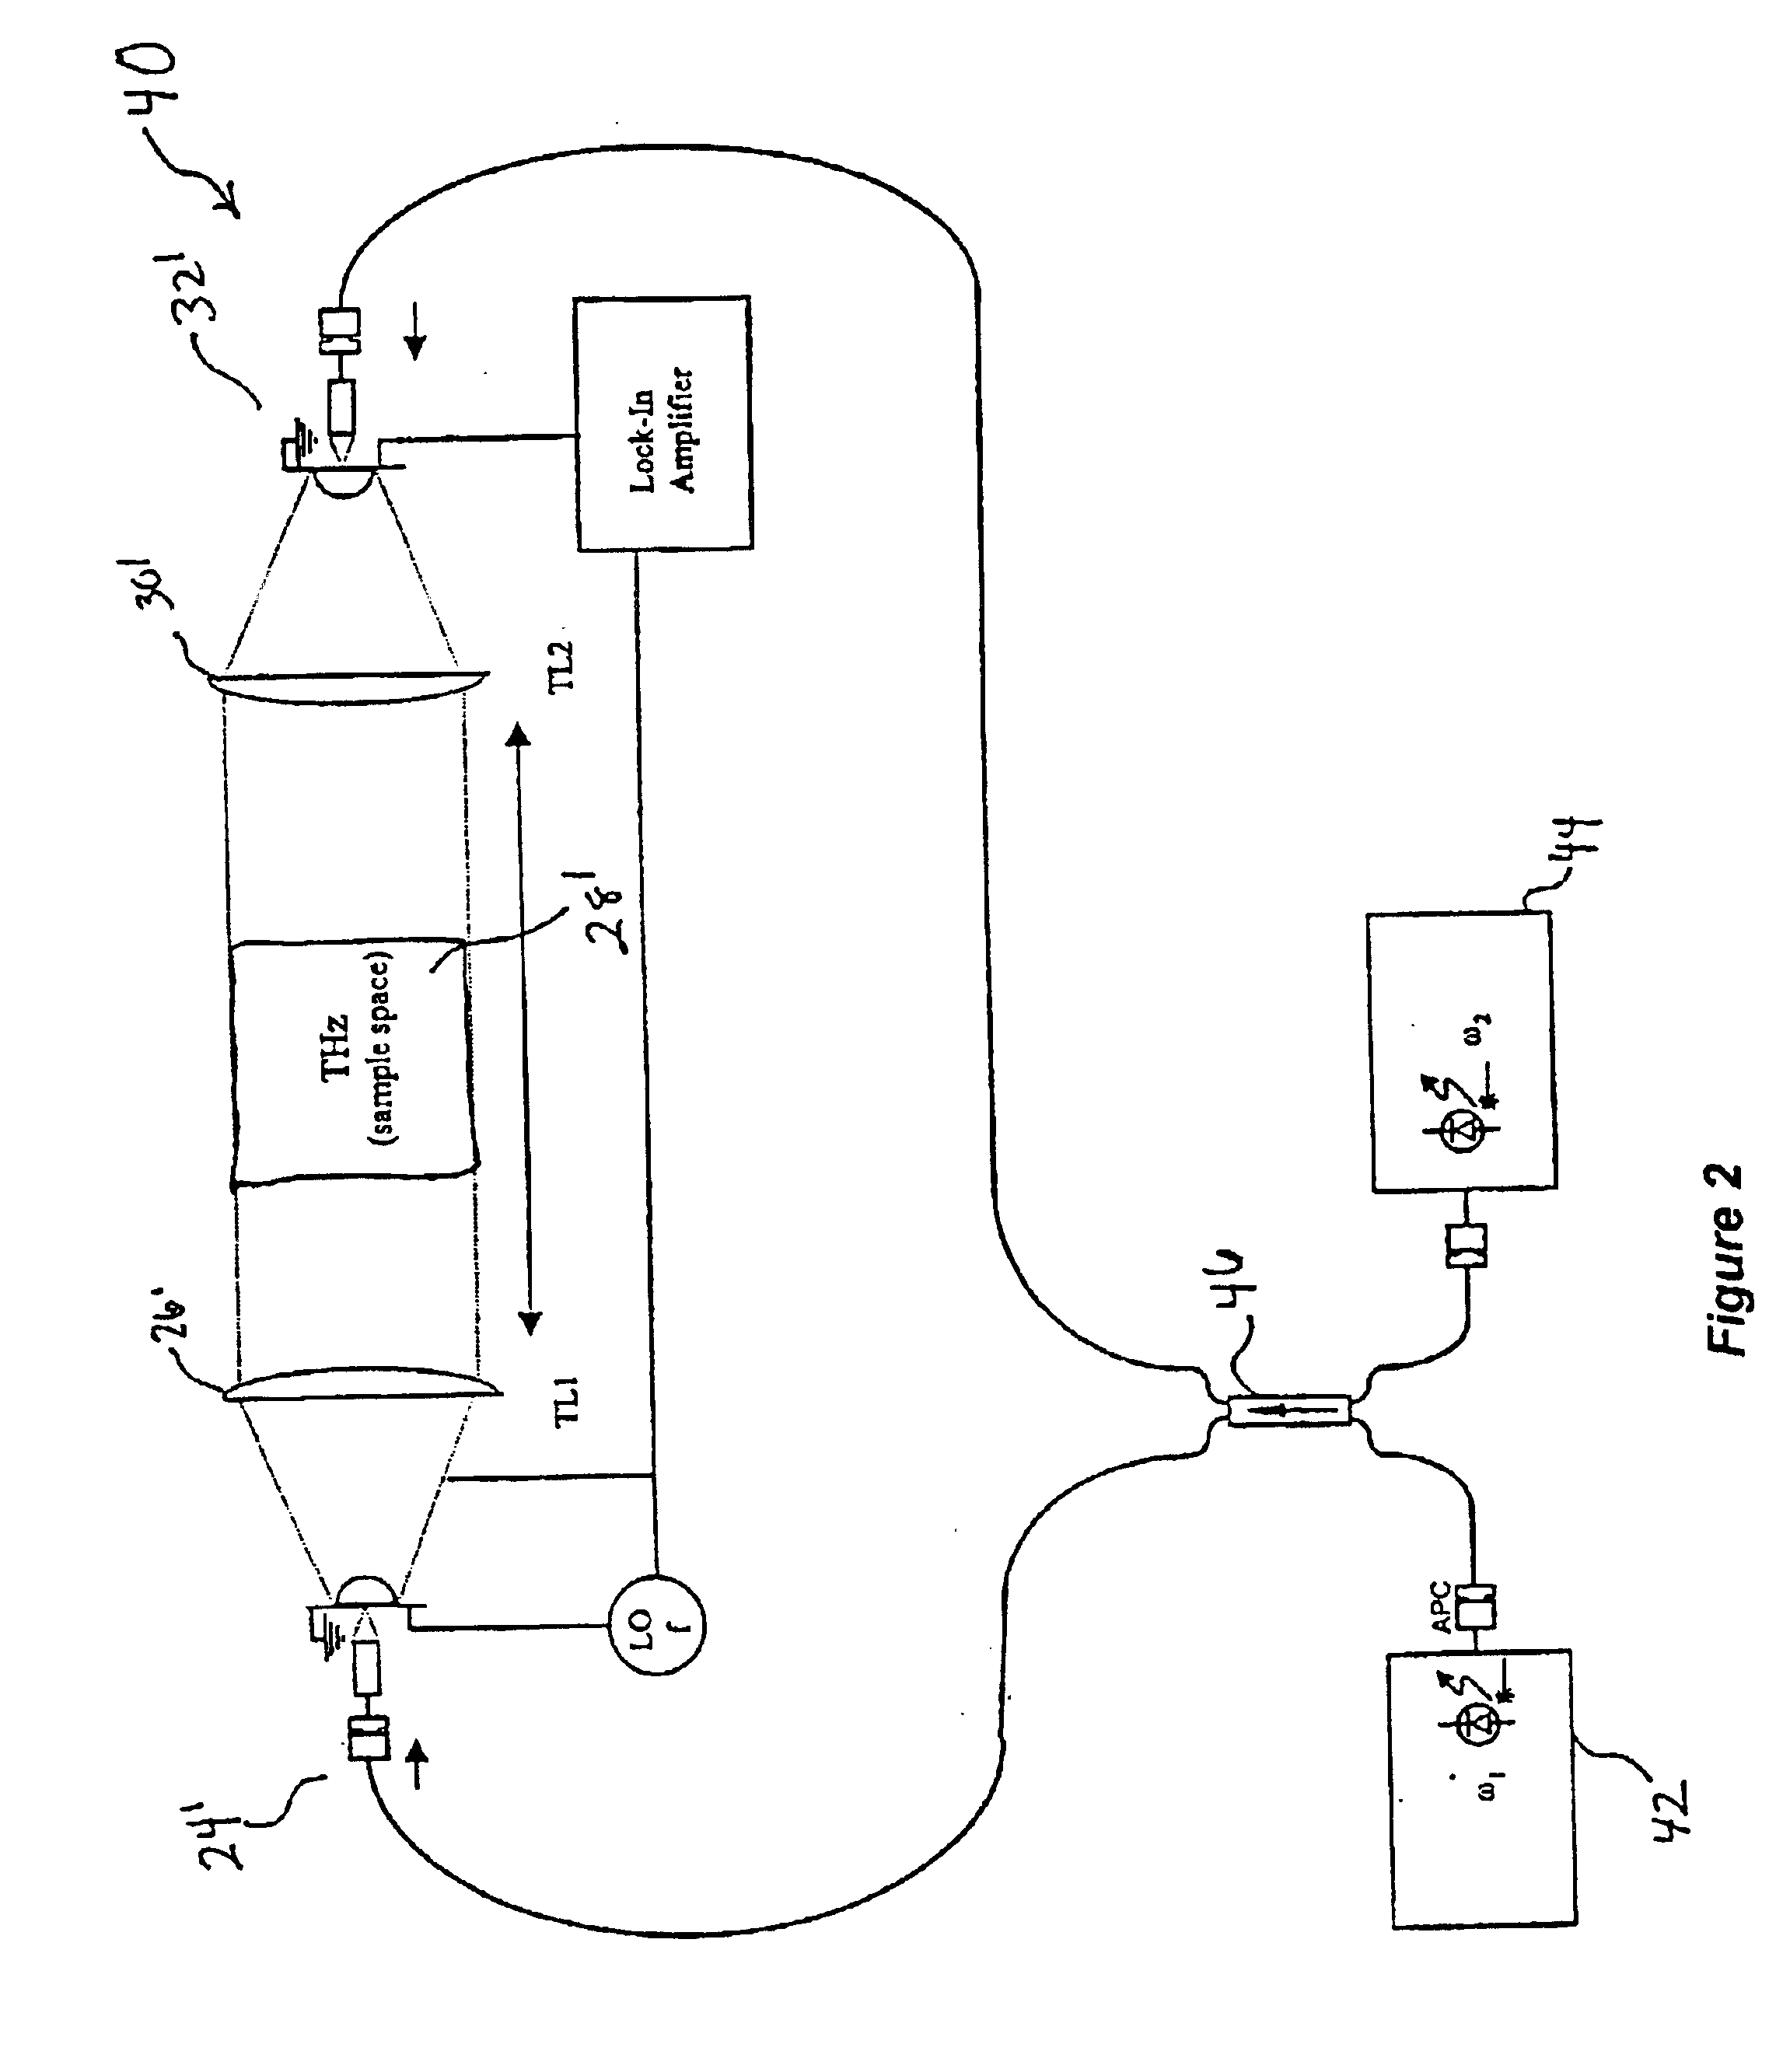 System and method for monitoring changes in state of matter with terahertz radiation